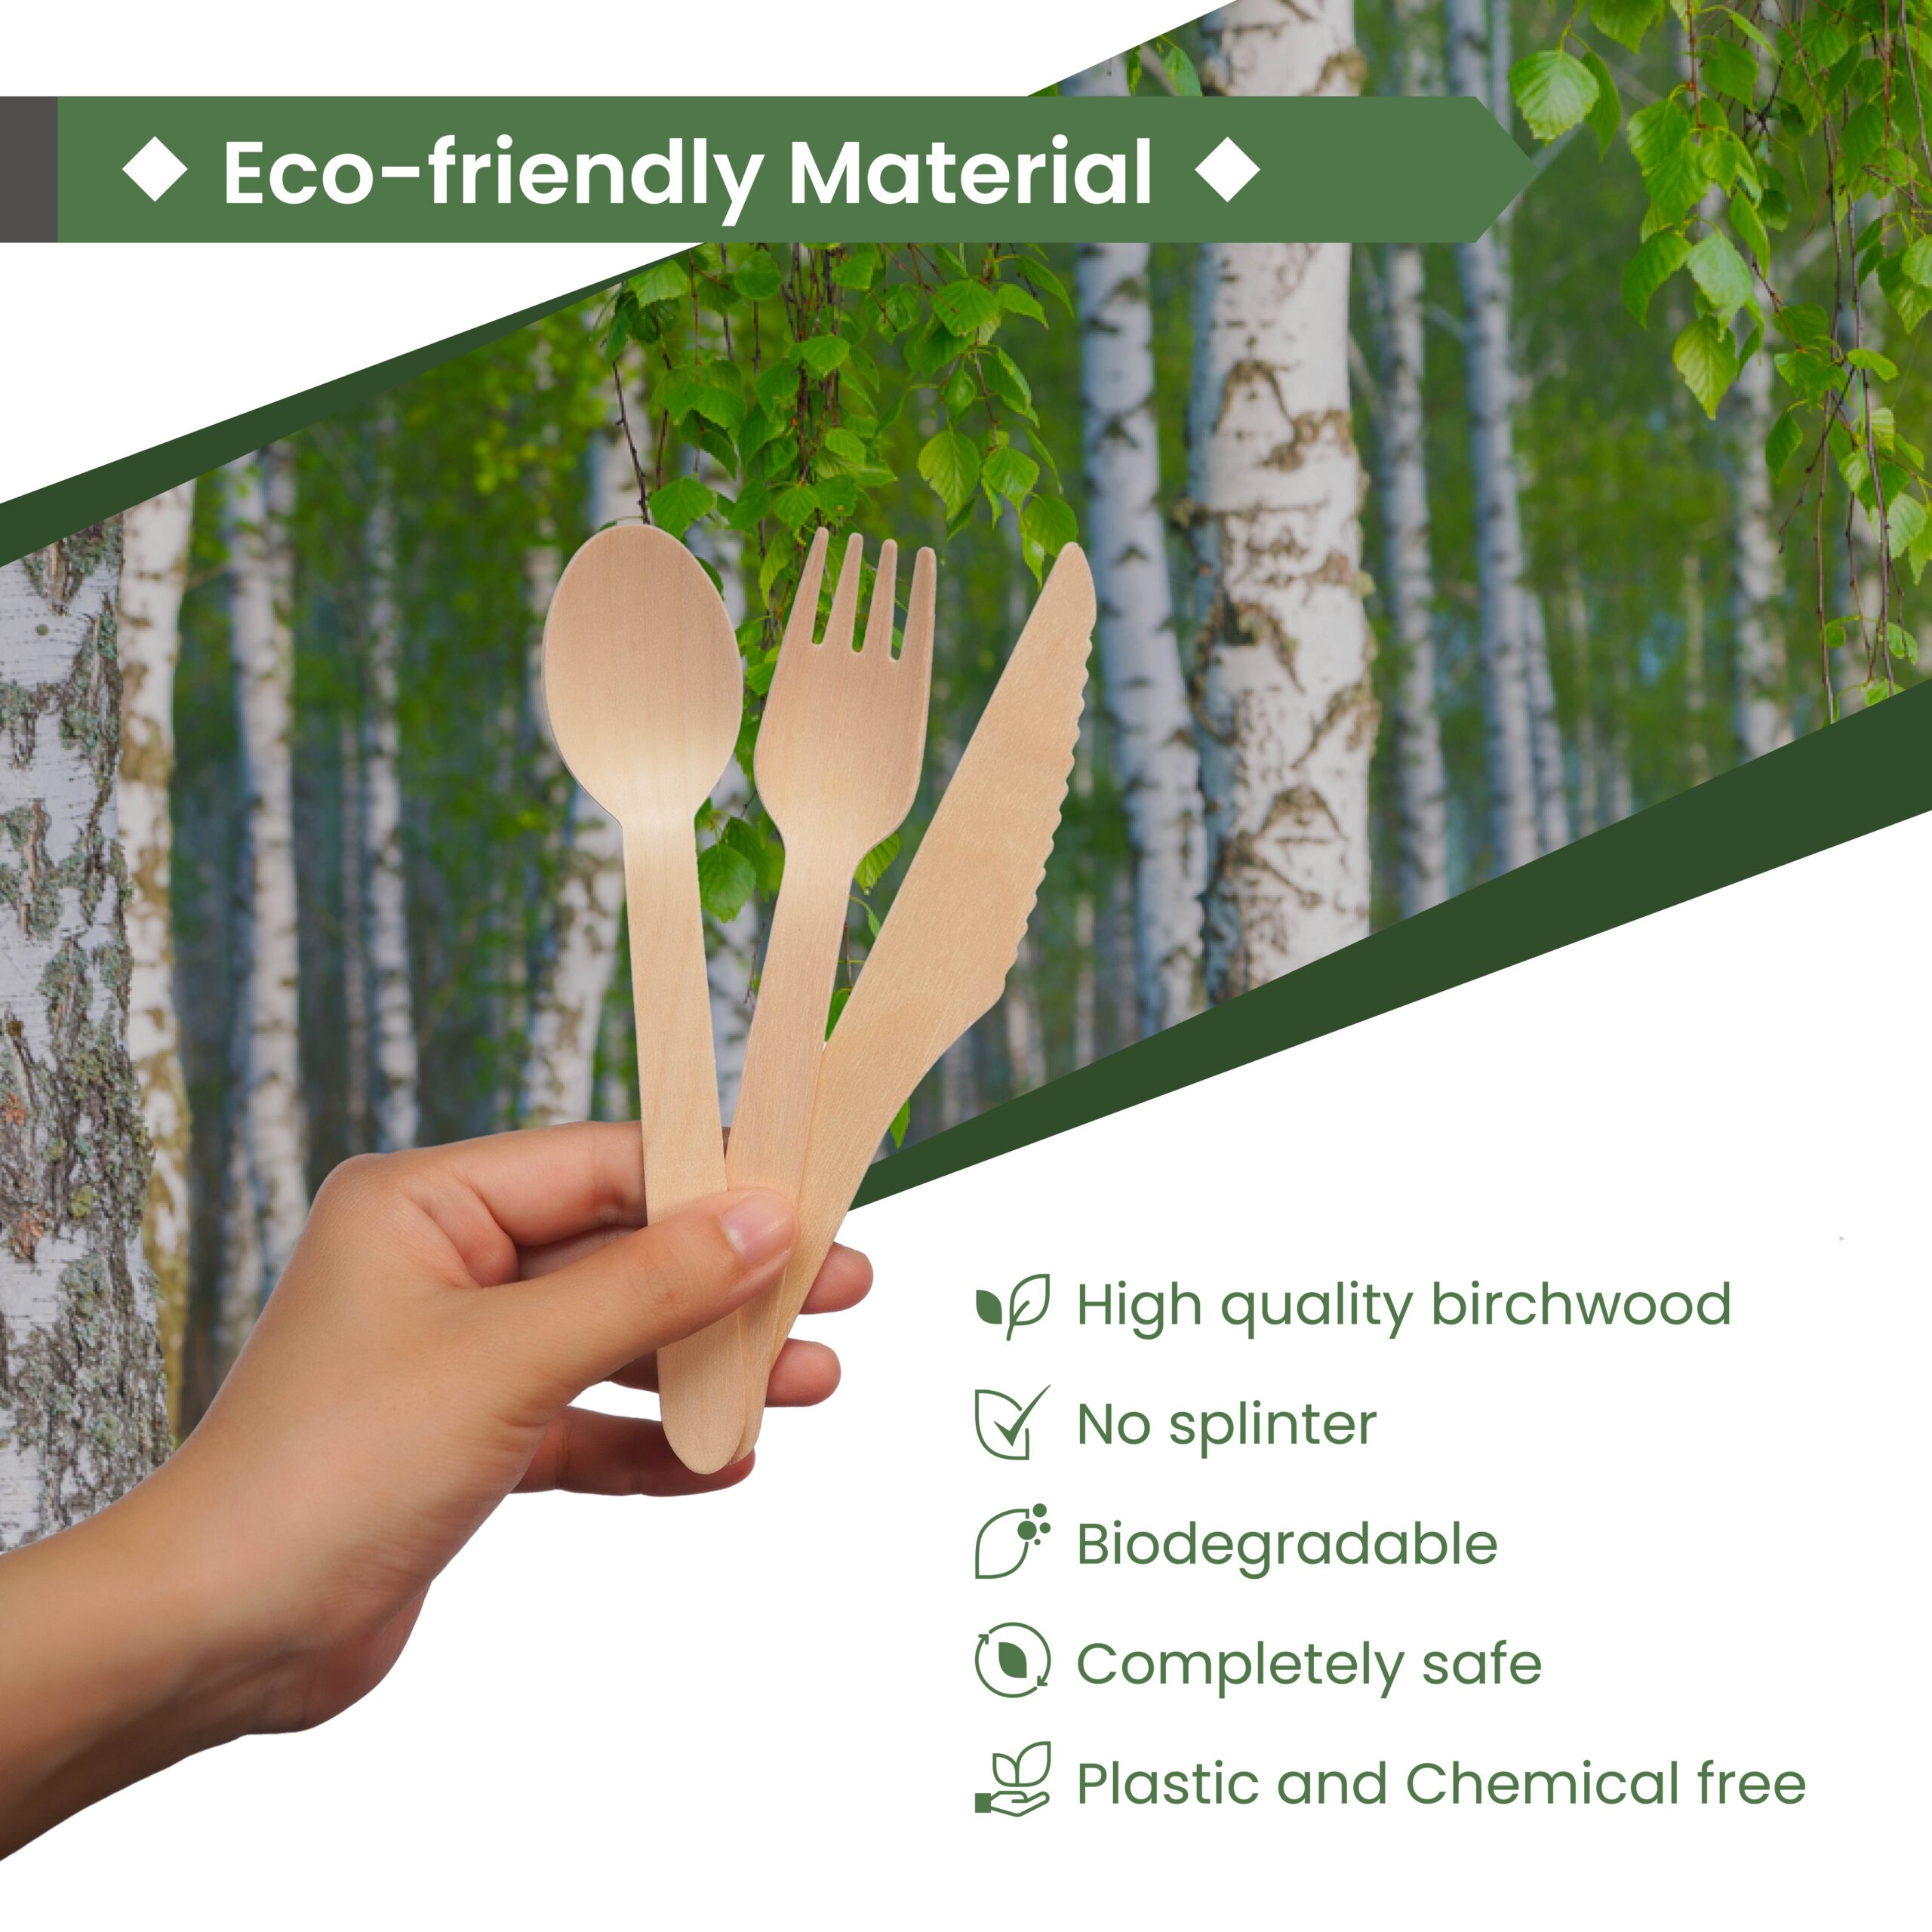 100 Knives 100 Forks Sealed 100 Spoons Birch Wood Eco Friendly Fully Compostable Hygiene Proof 300 Wooden Cutlery Set Biodegradable